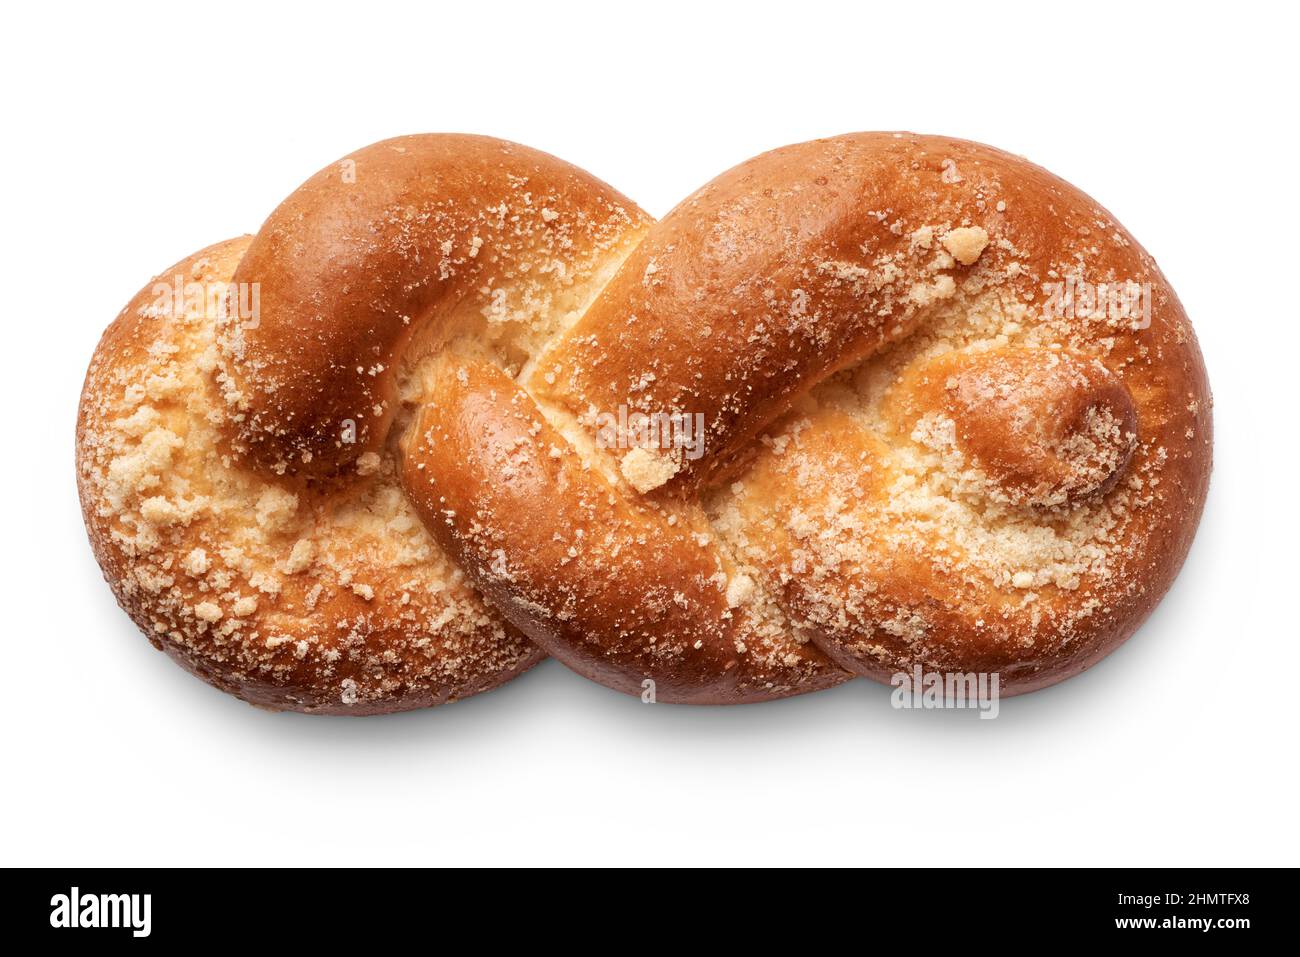 Isolated objects: traditional twisted wheat bun, on white background Stock Photo